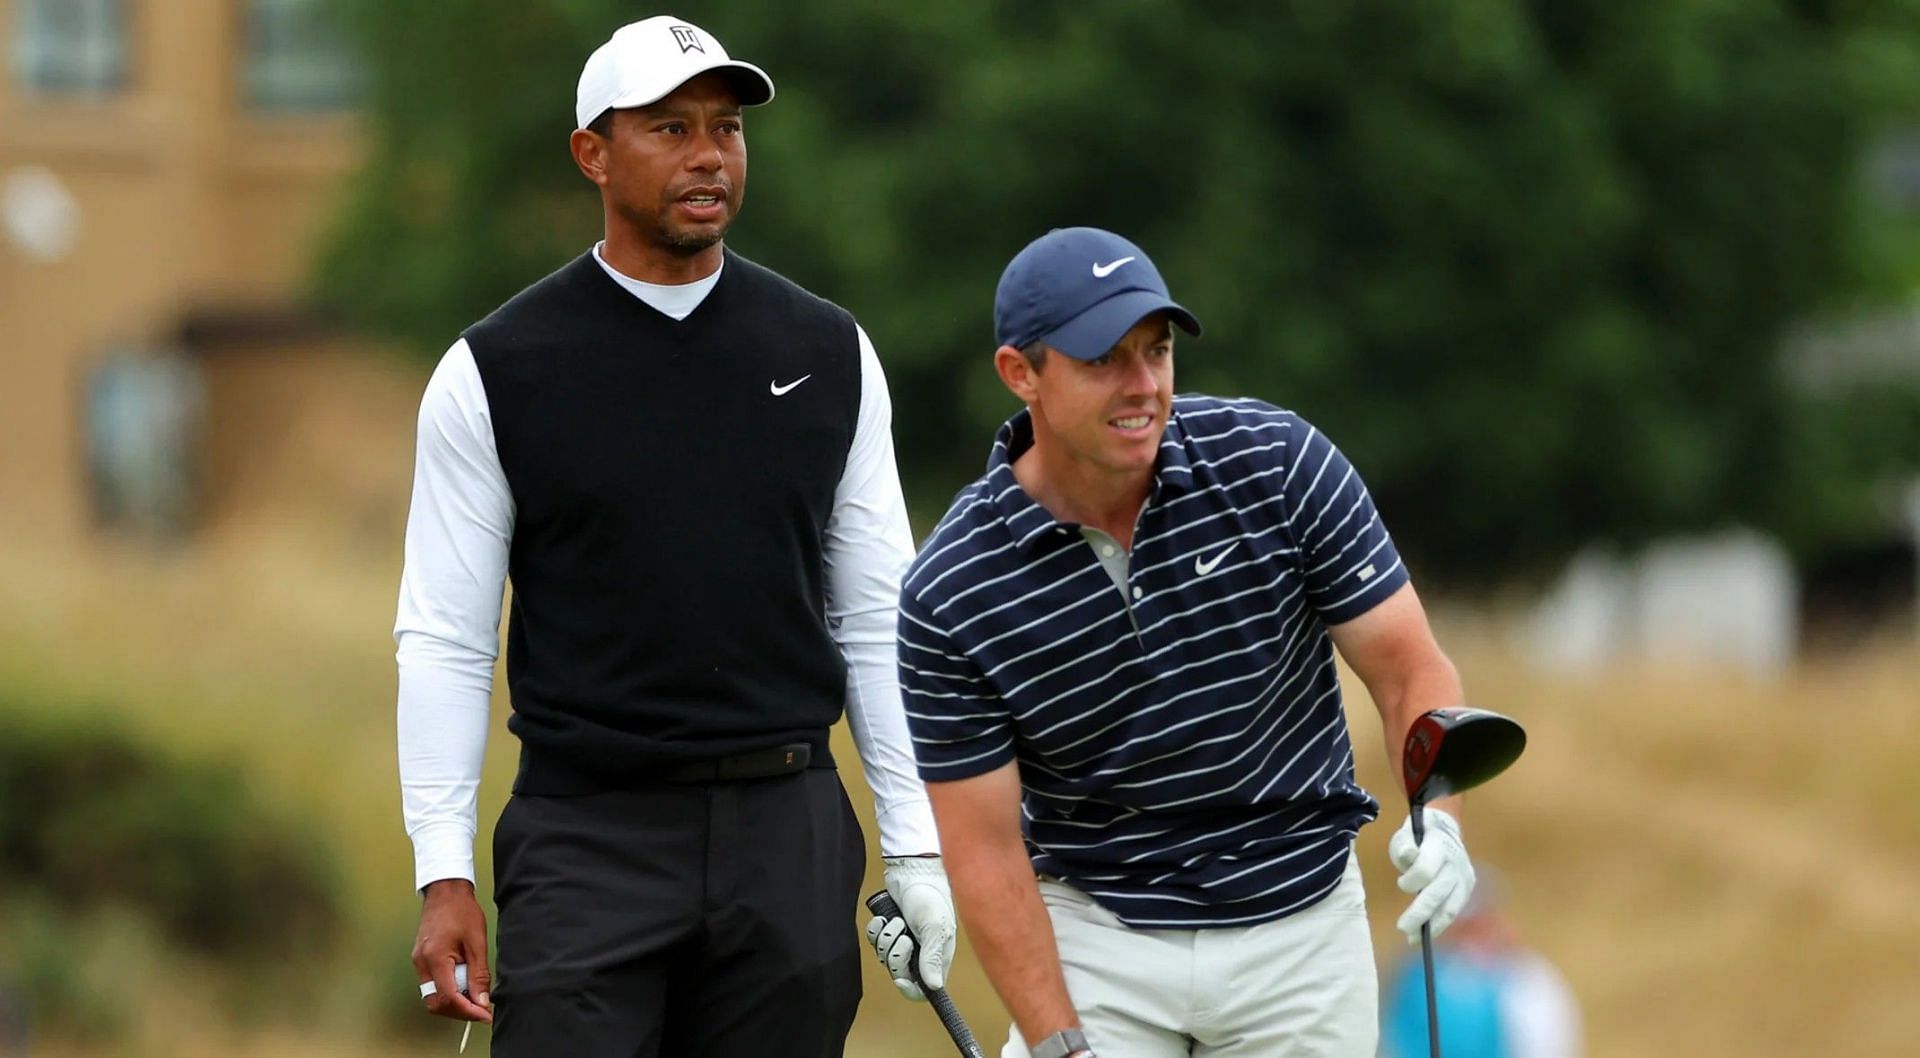 Tiger Woods and Rory McIlroy (Image via Getty)